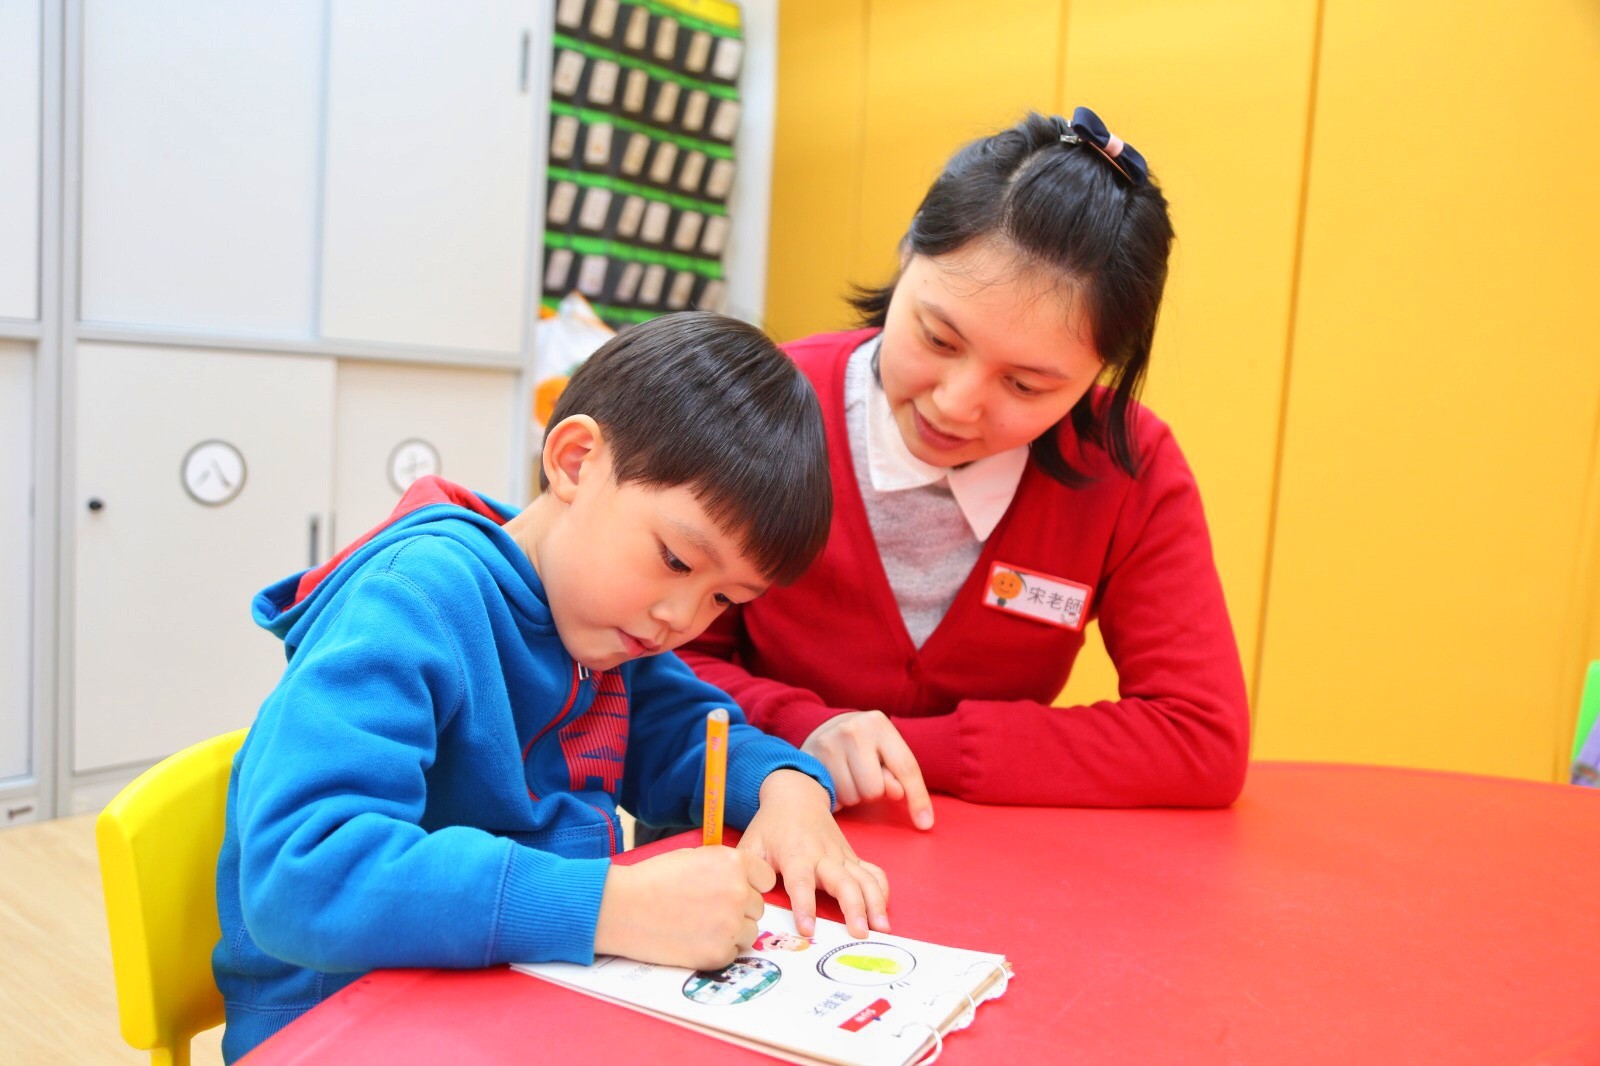 ‘Structure, Engagement, and Accent’ are the keywords when it comes to selecting a suitable Mandarin tutor for your child.